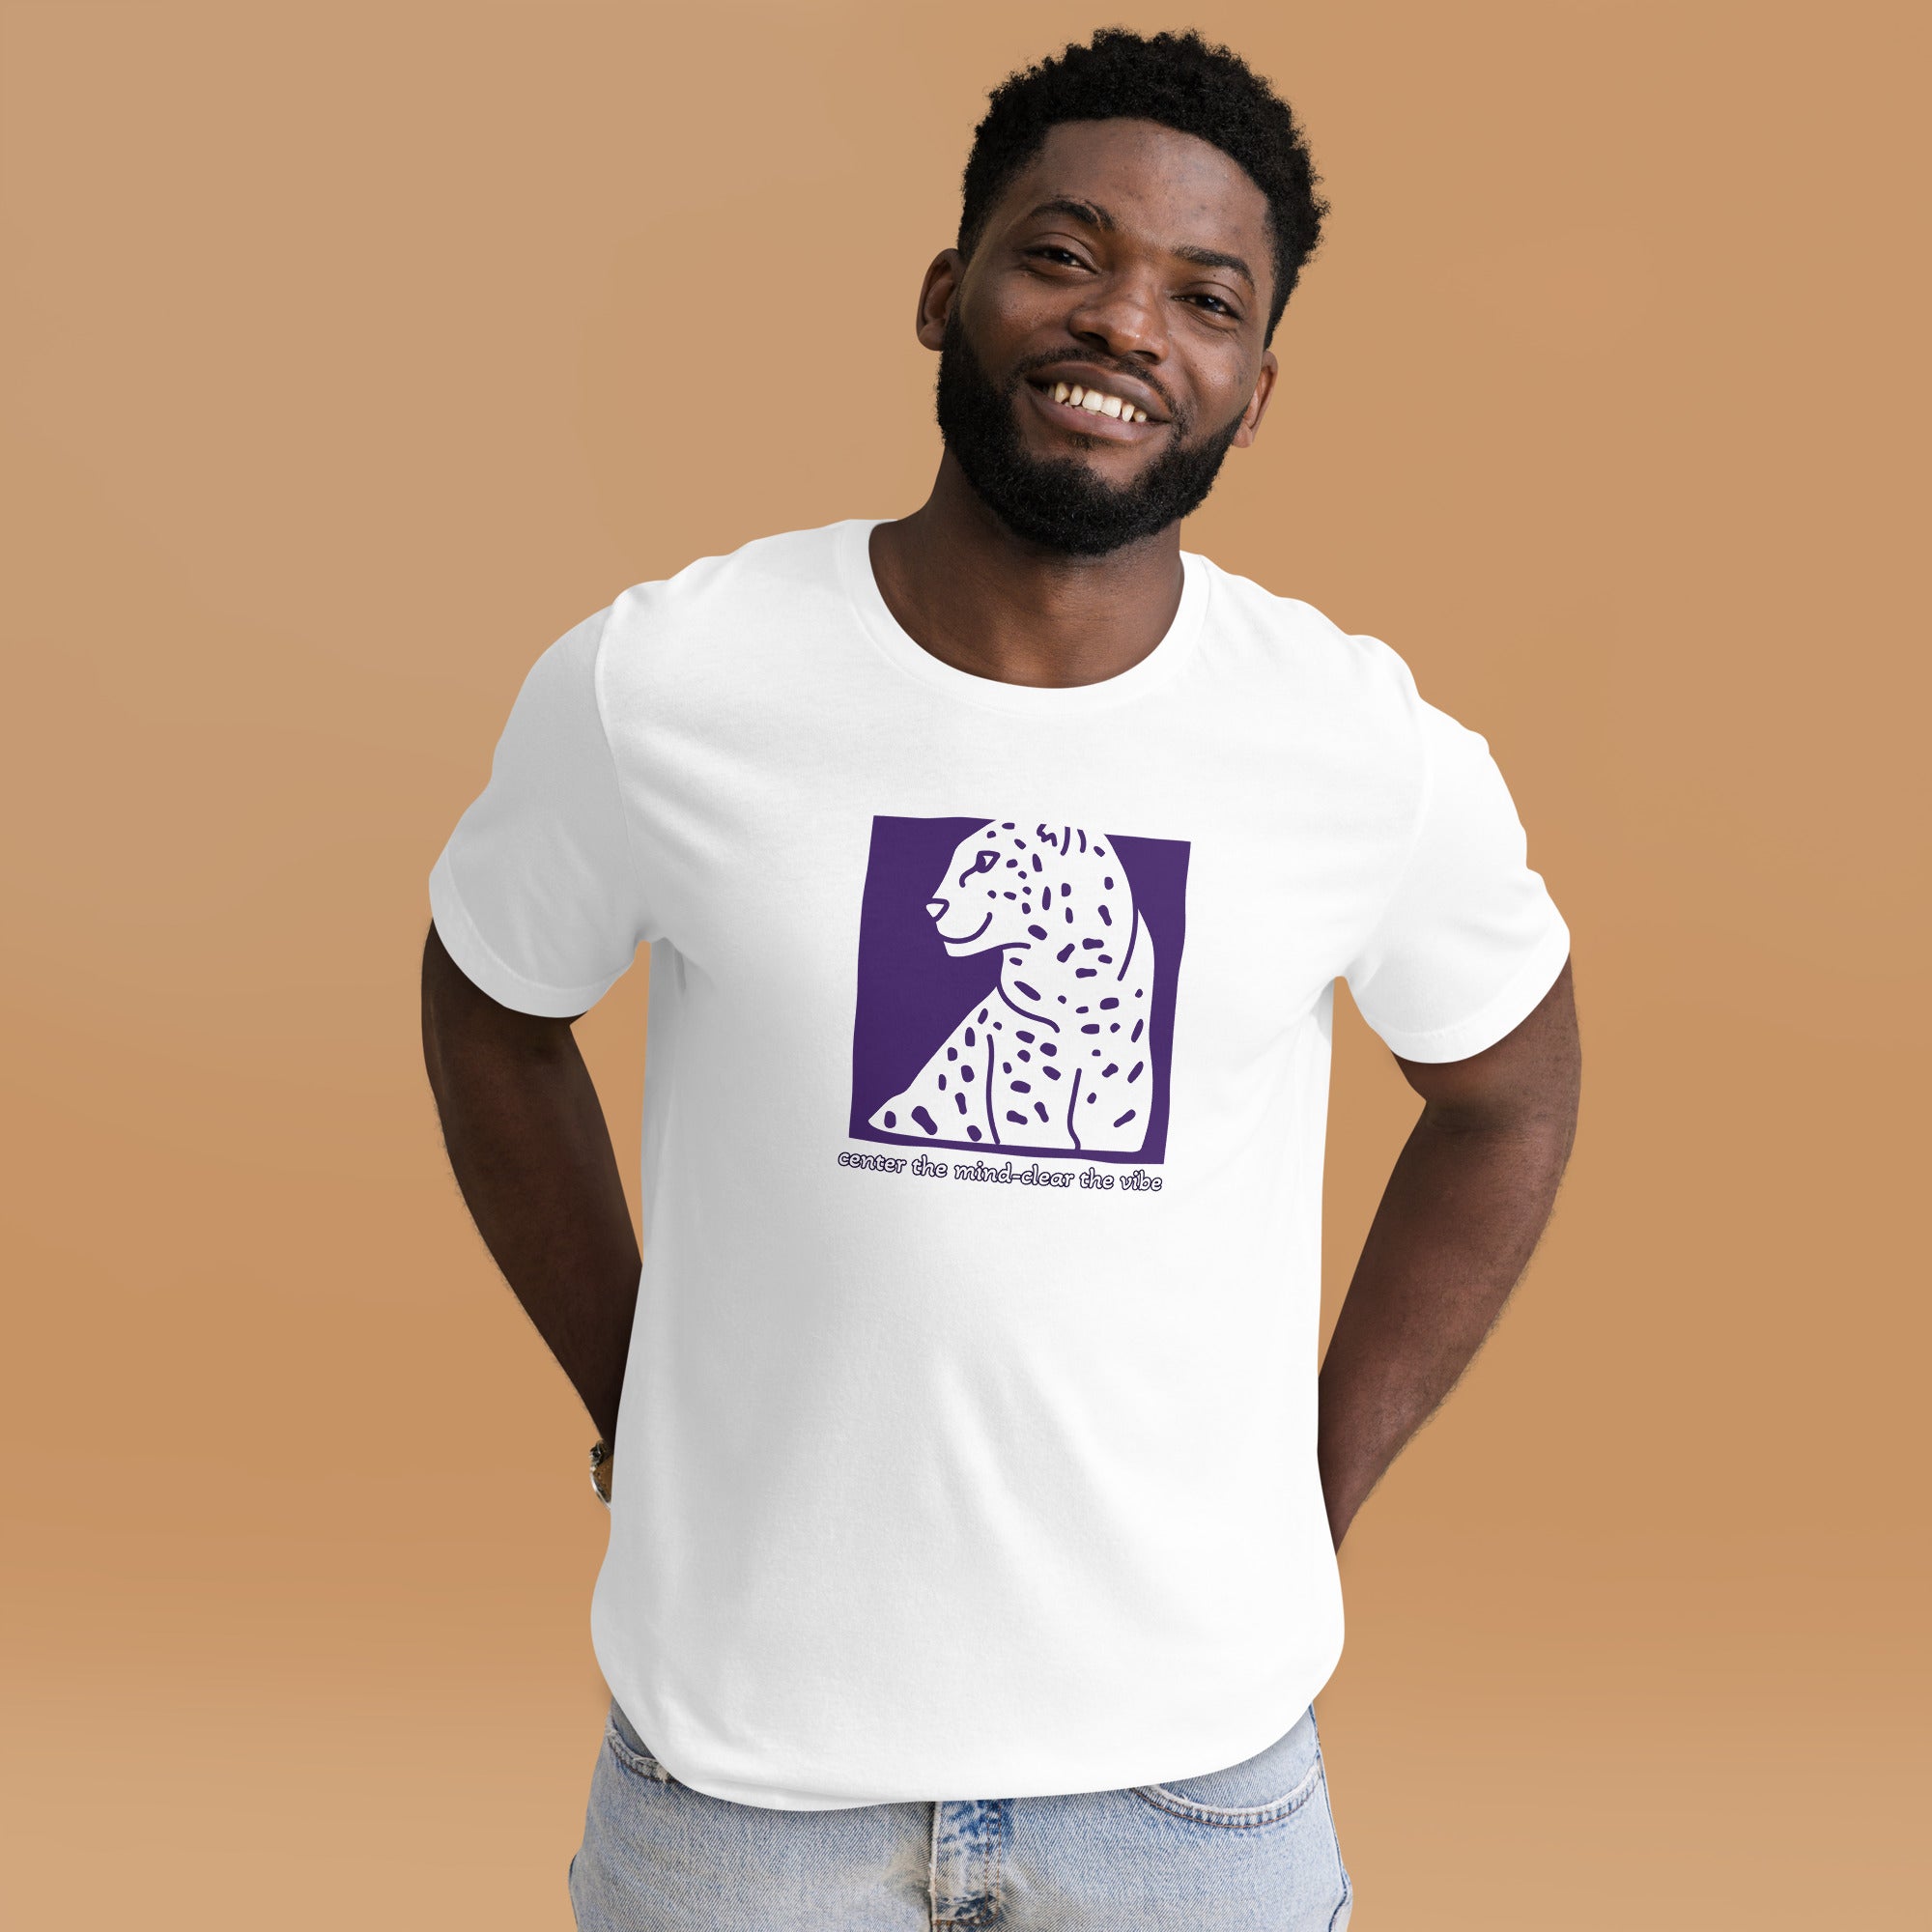 clear your mind t-shirt